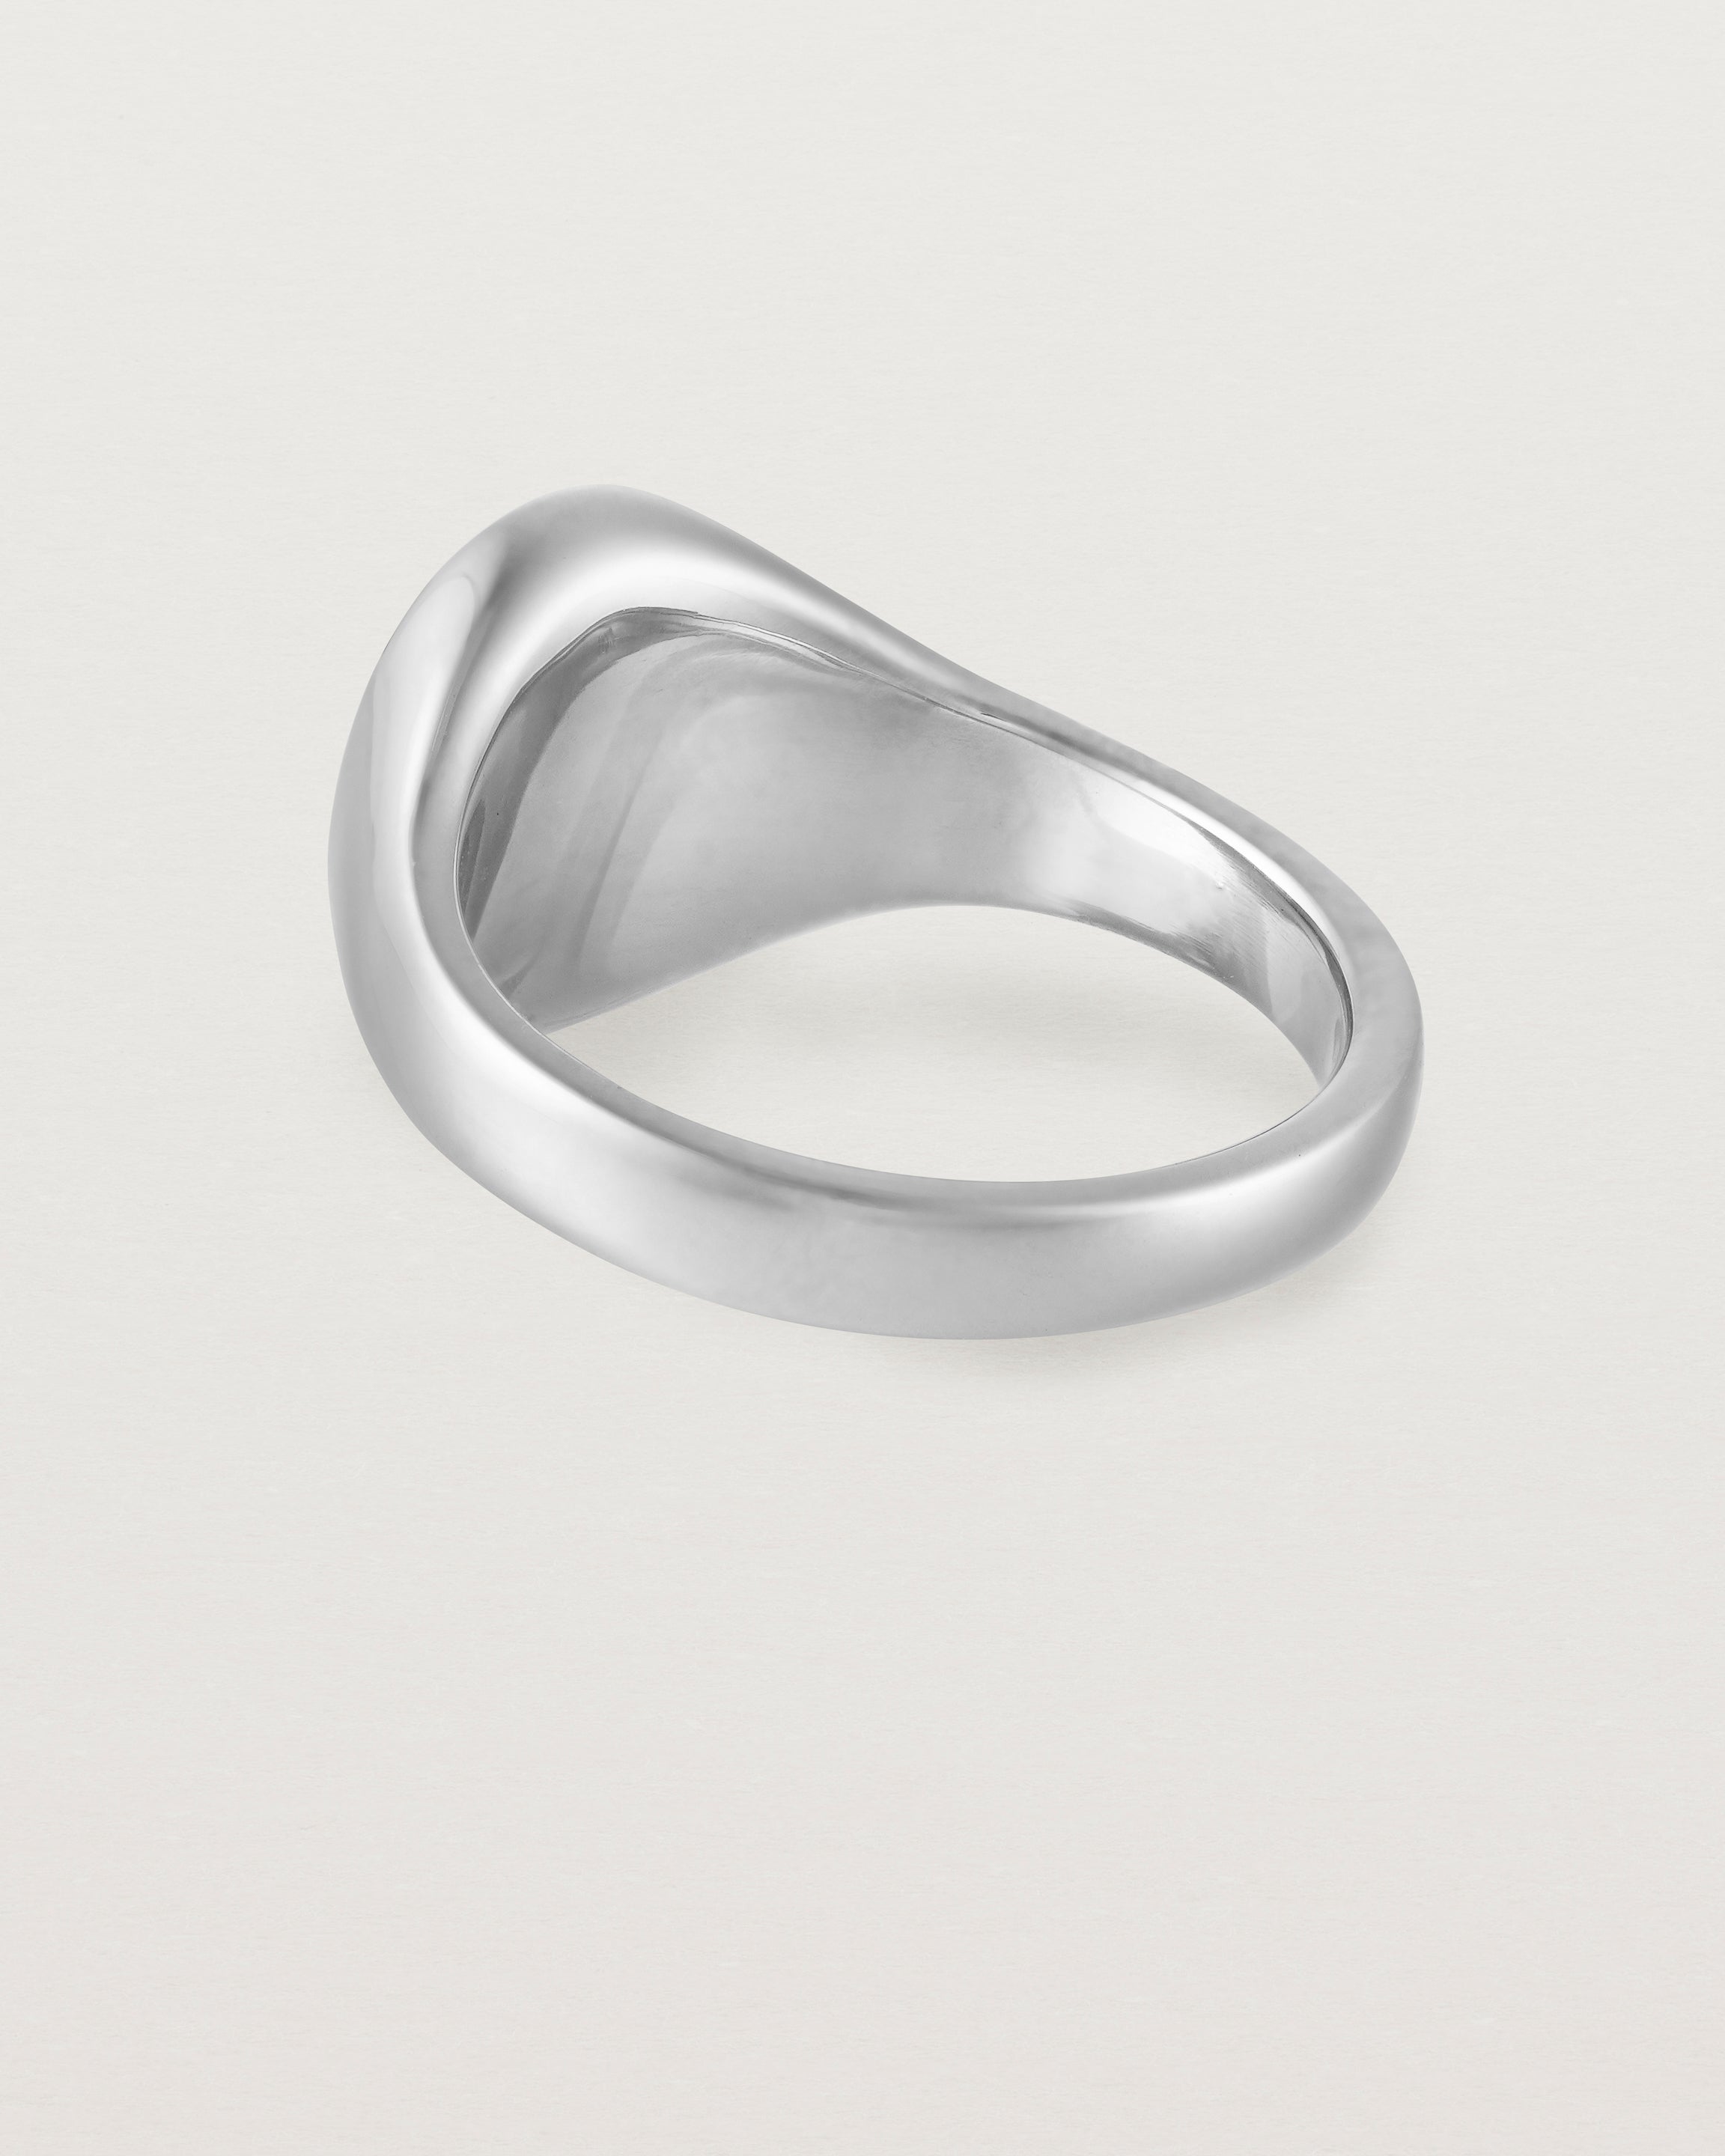 Back view of the Arden Signet Ring in White Gold.